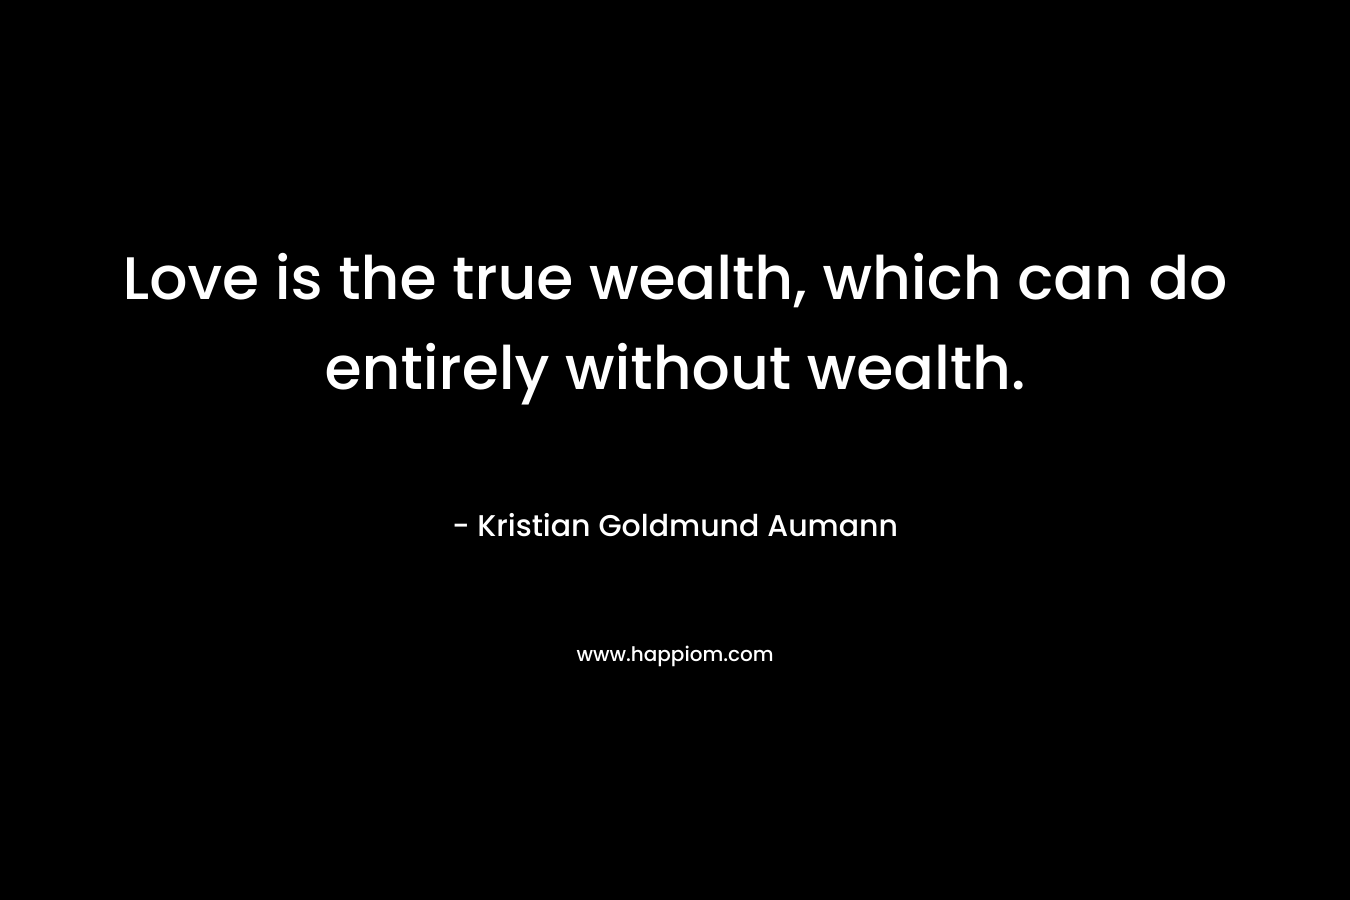 Love is the true wealth, which can do entirely without wealth.